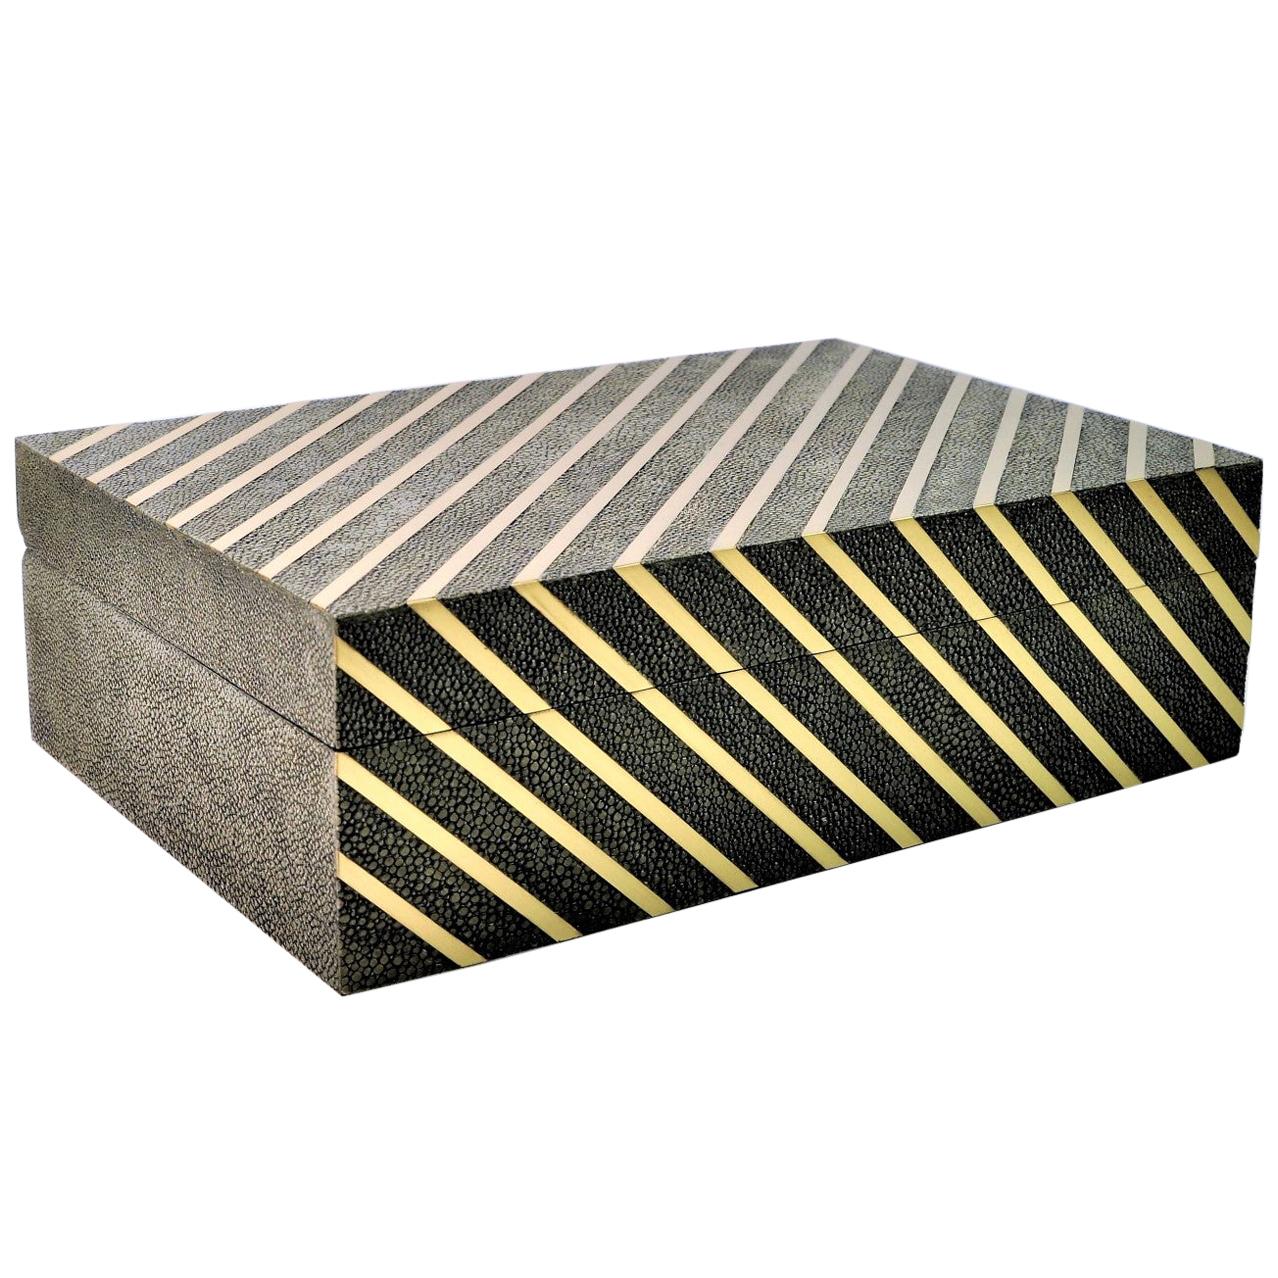 Rectangular Shagreen Box with Brass Trims by Ginger Brown